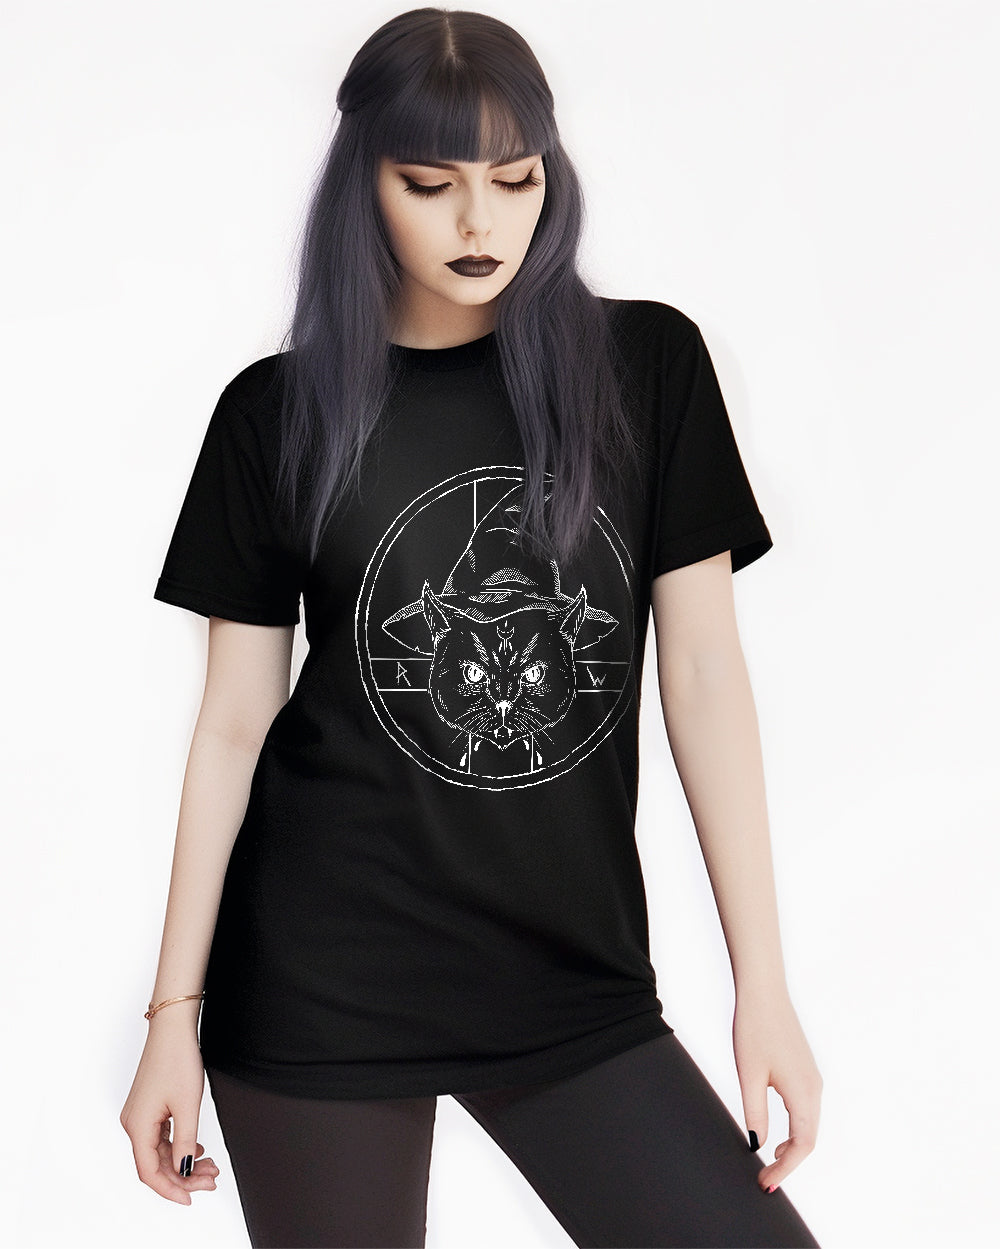 Purrfect Witchery Tee - Unisex Vegan T-Shirt Dark Academia Gothic Style Witchy Clothing Occult Gift Cat Lovers